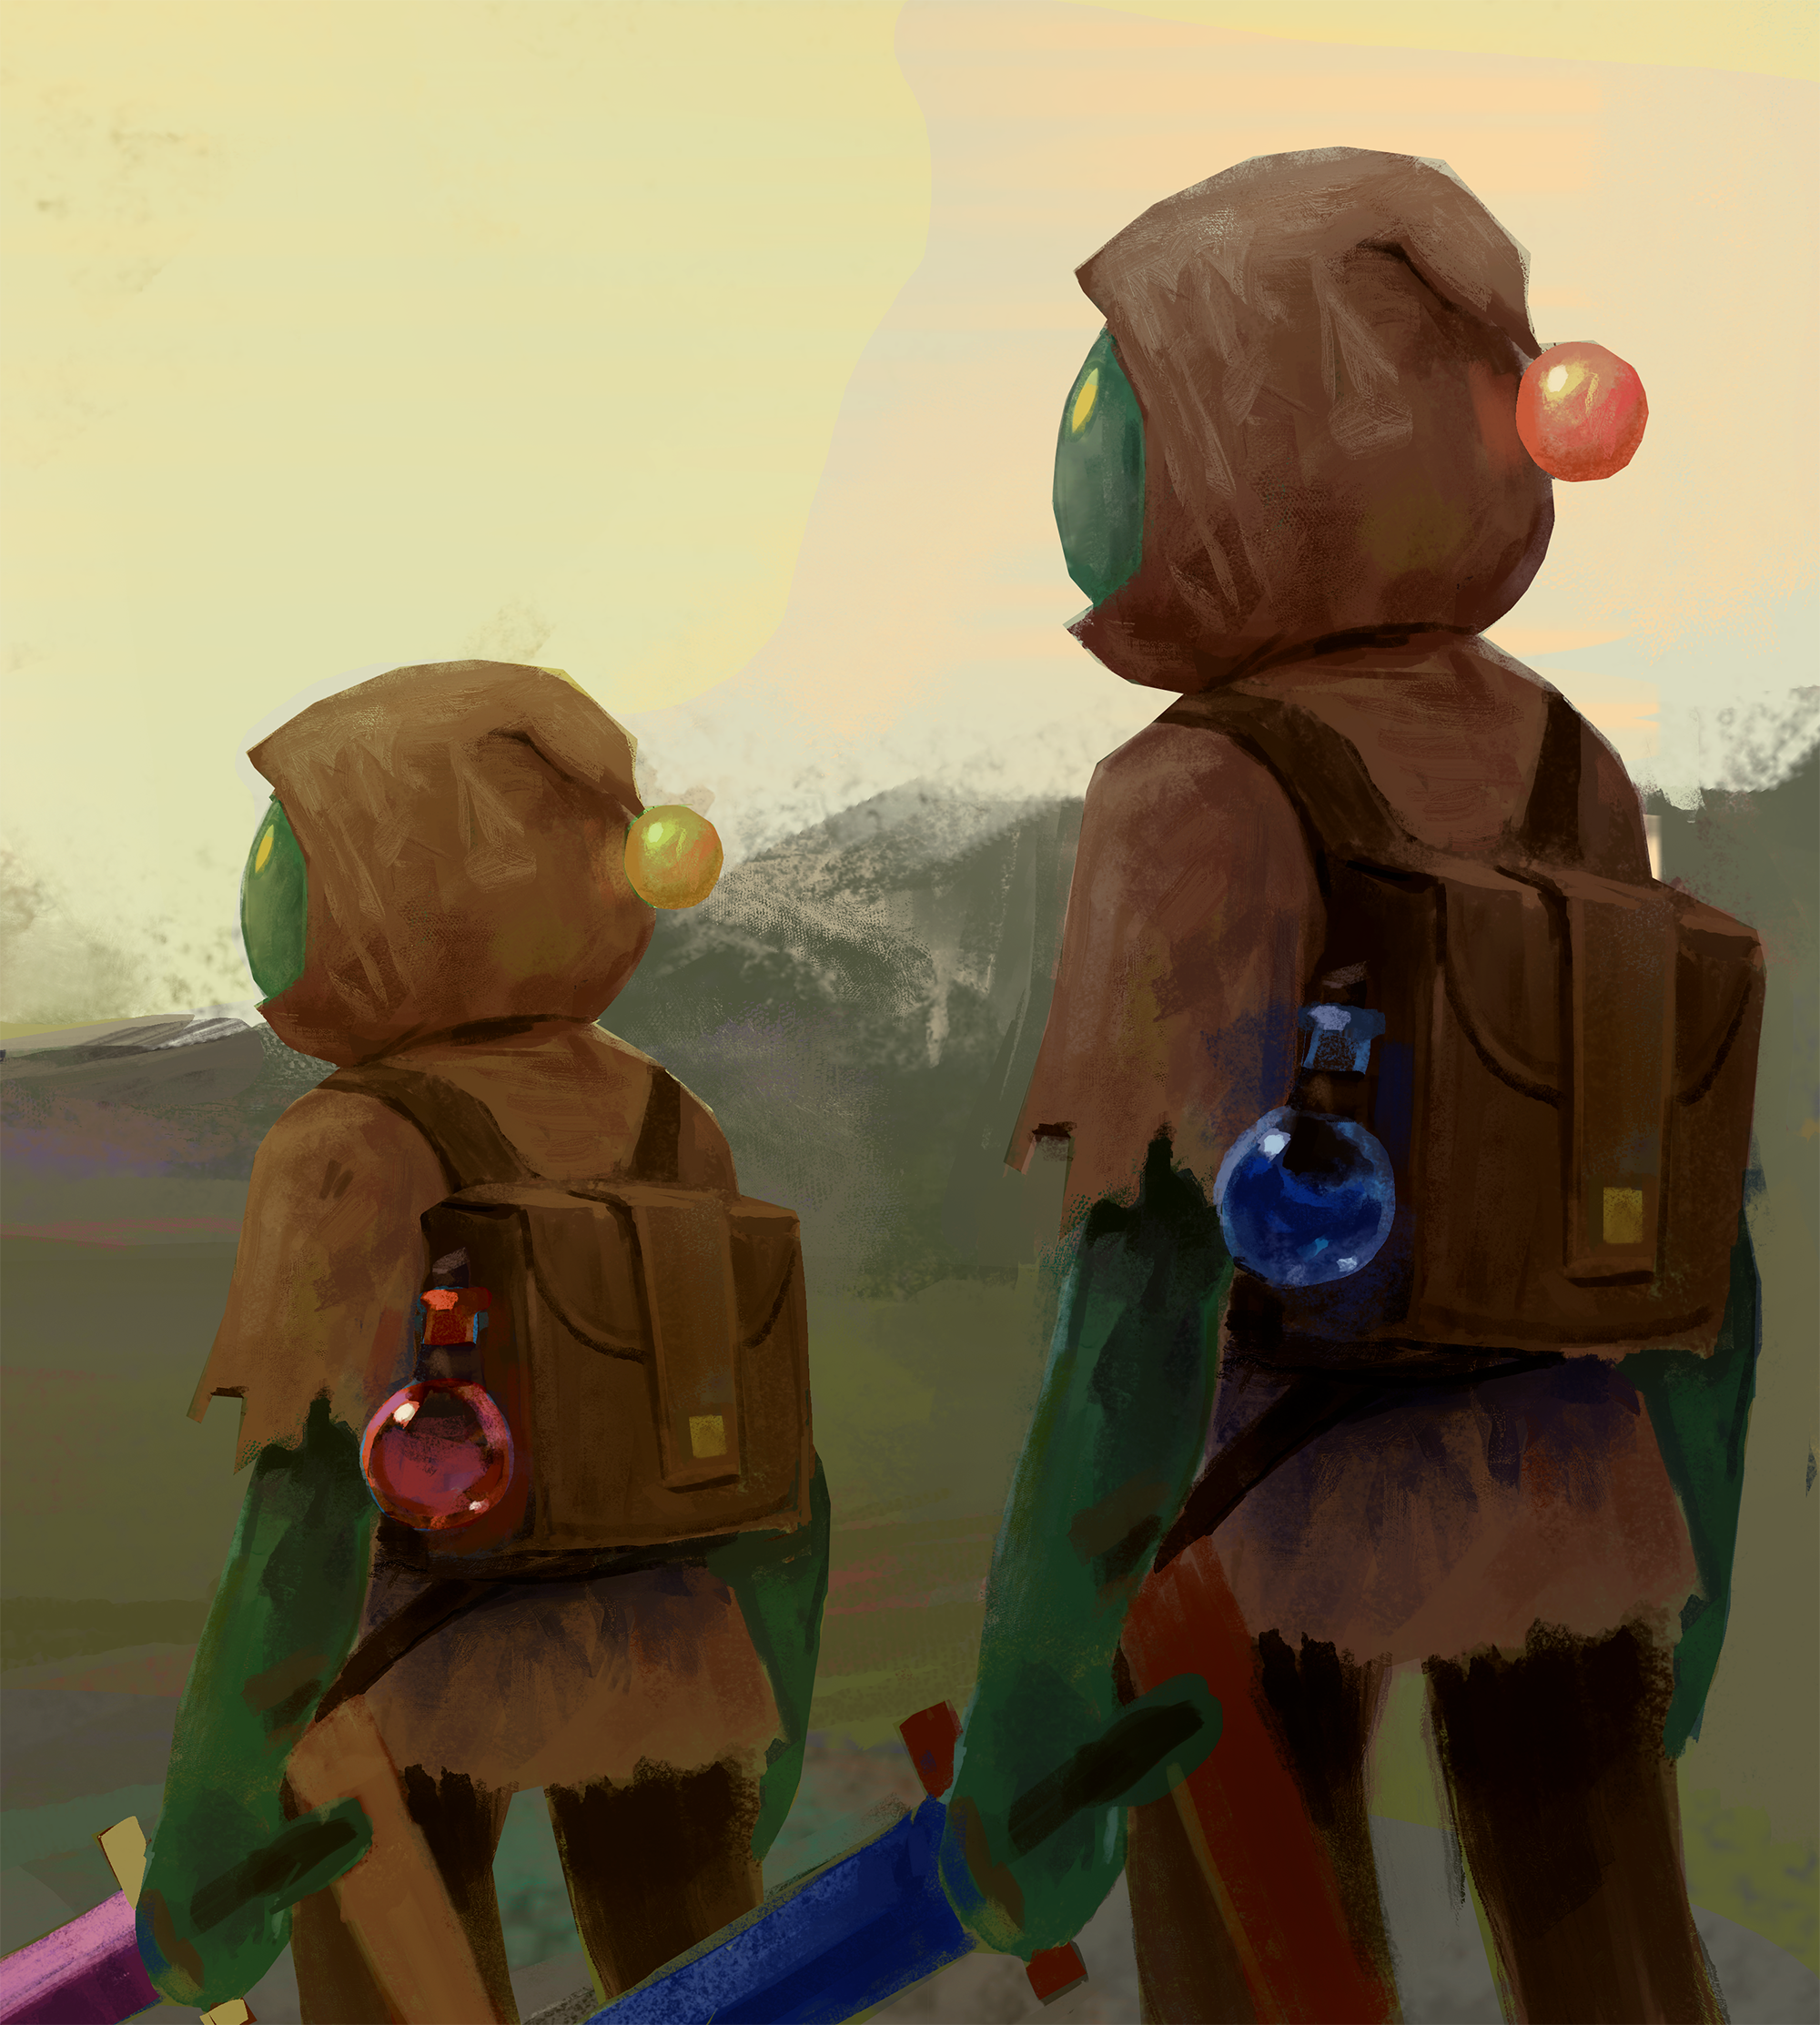 digital painting of two slime adventurers looking to the left each with their own red and blue potion bottles attached to their bags